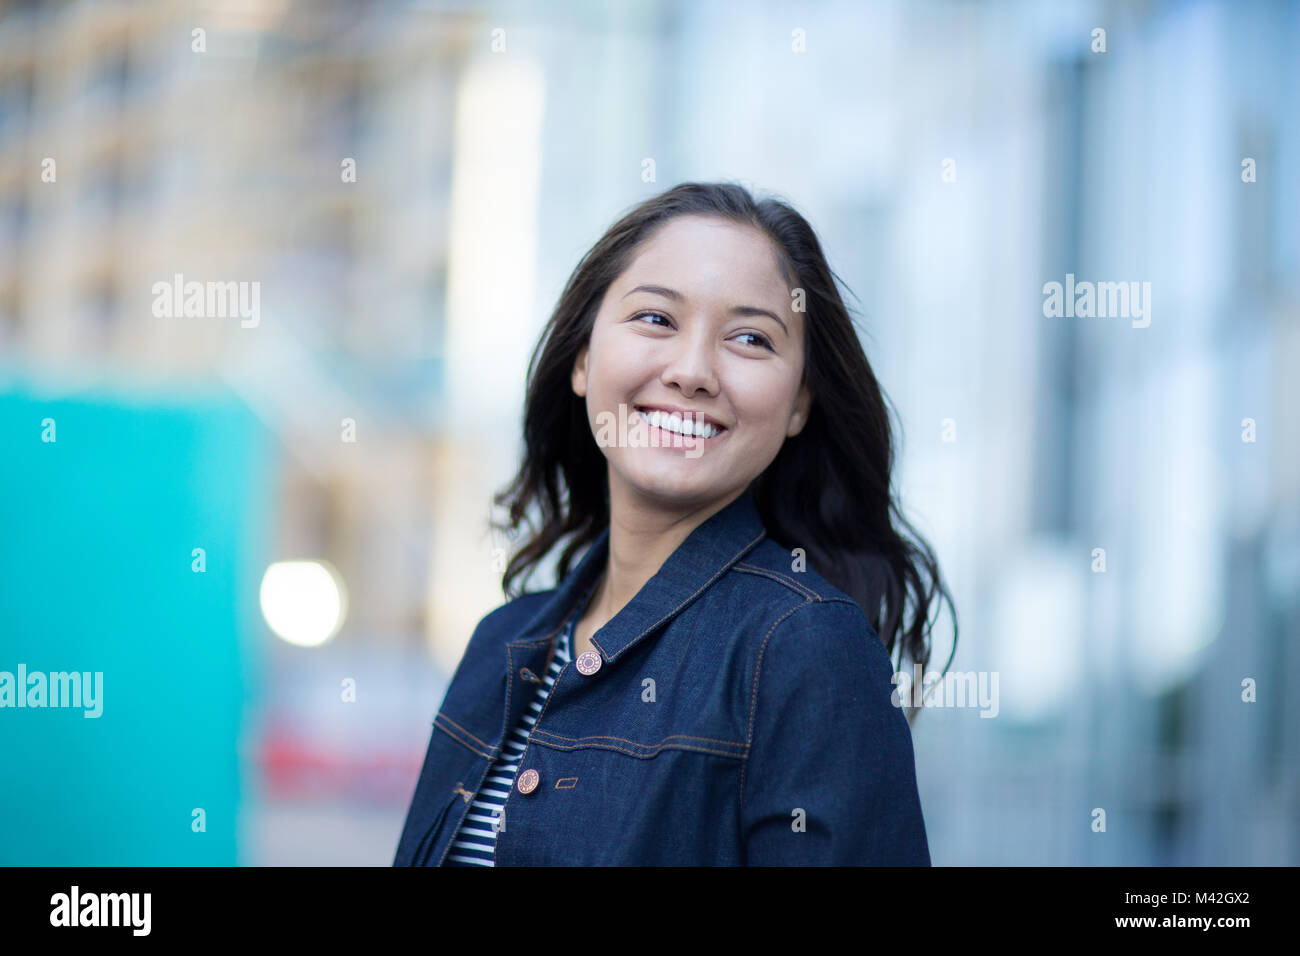 Young adult walking down street in a city Stock Photo